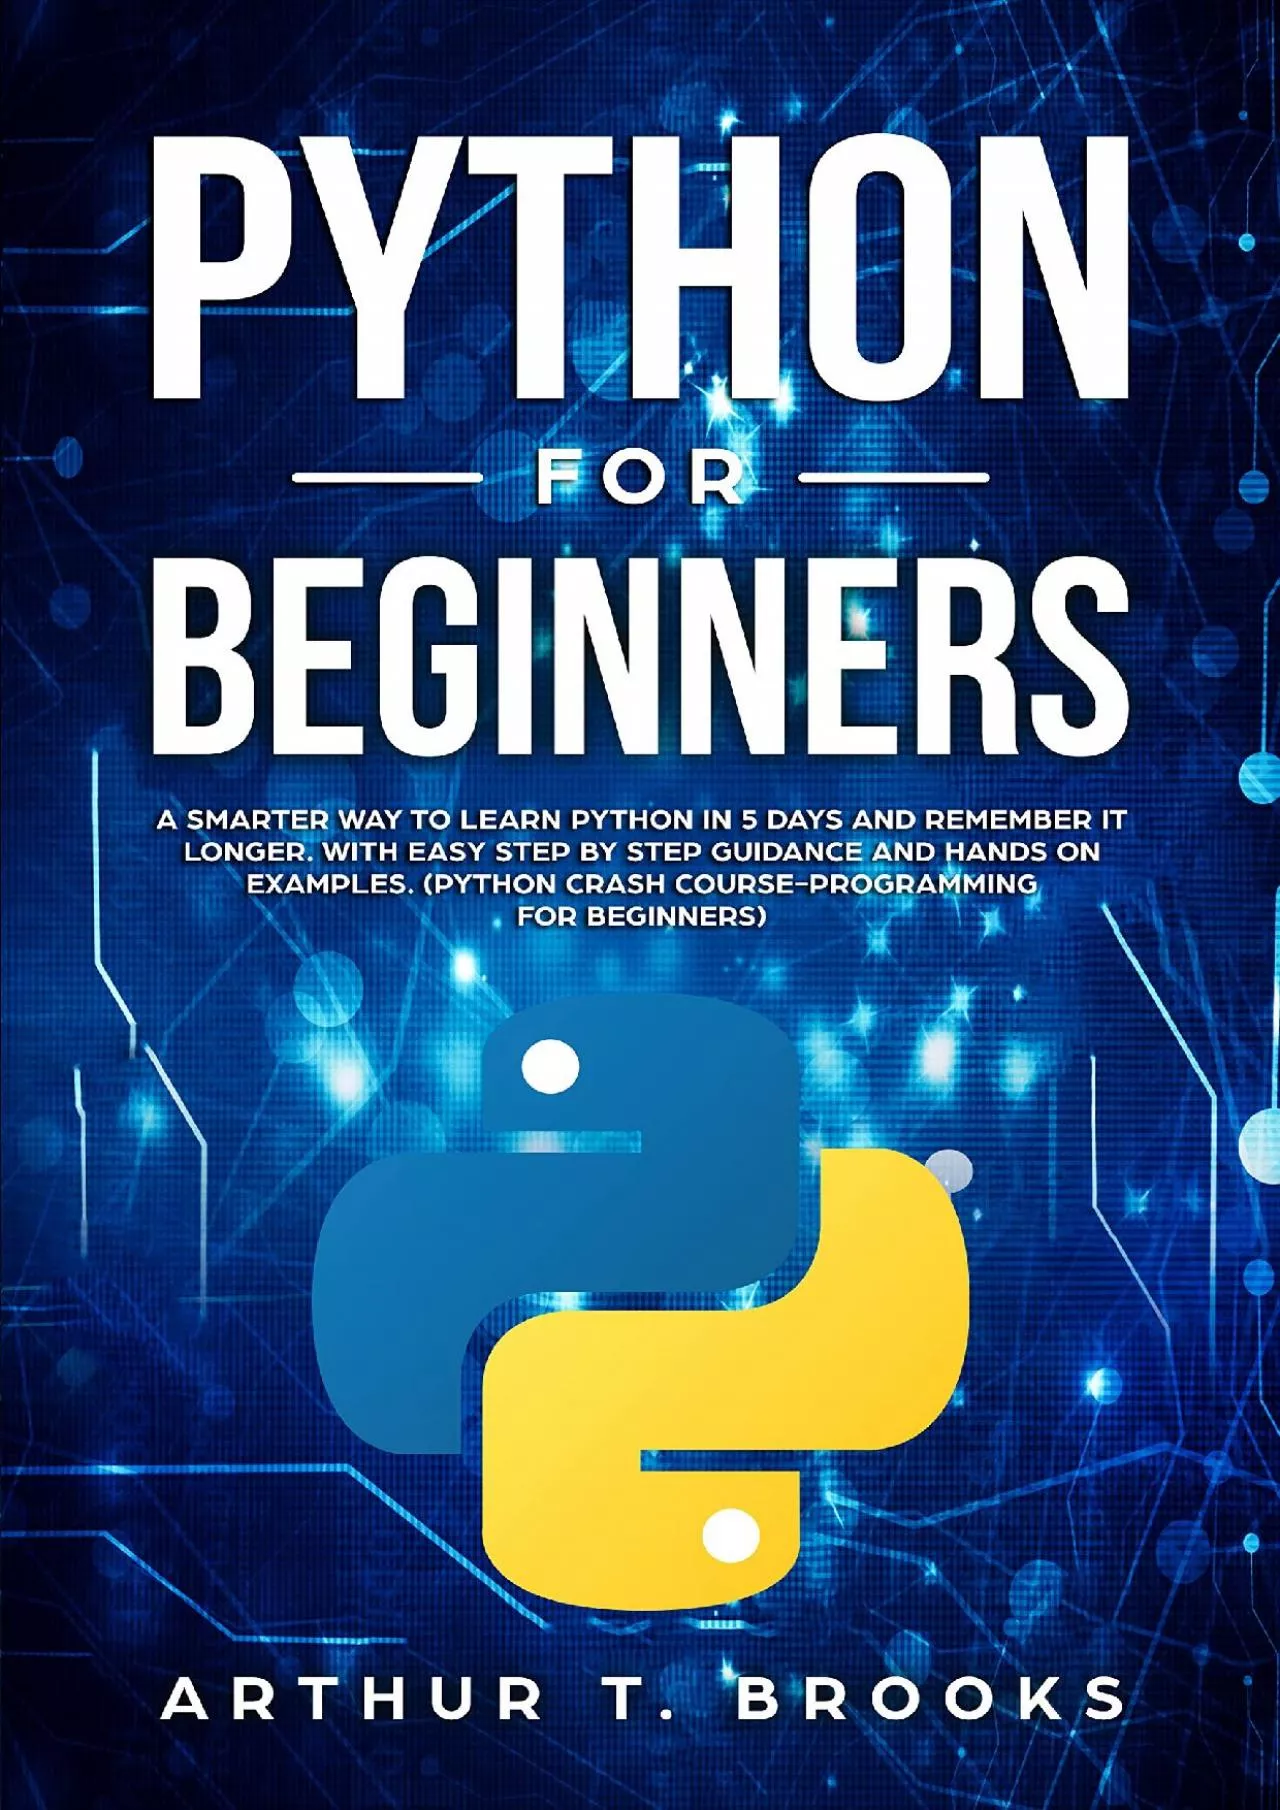 [eBOOK]-Python for Beginners: A Smarter Way to Learn Python in 5 Days and Remember it